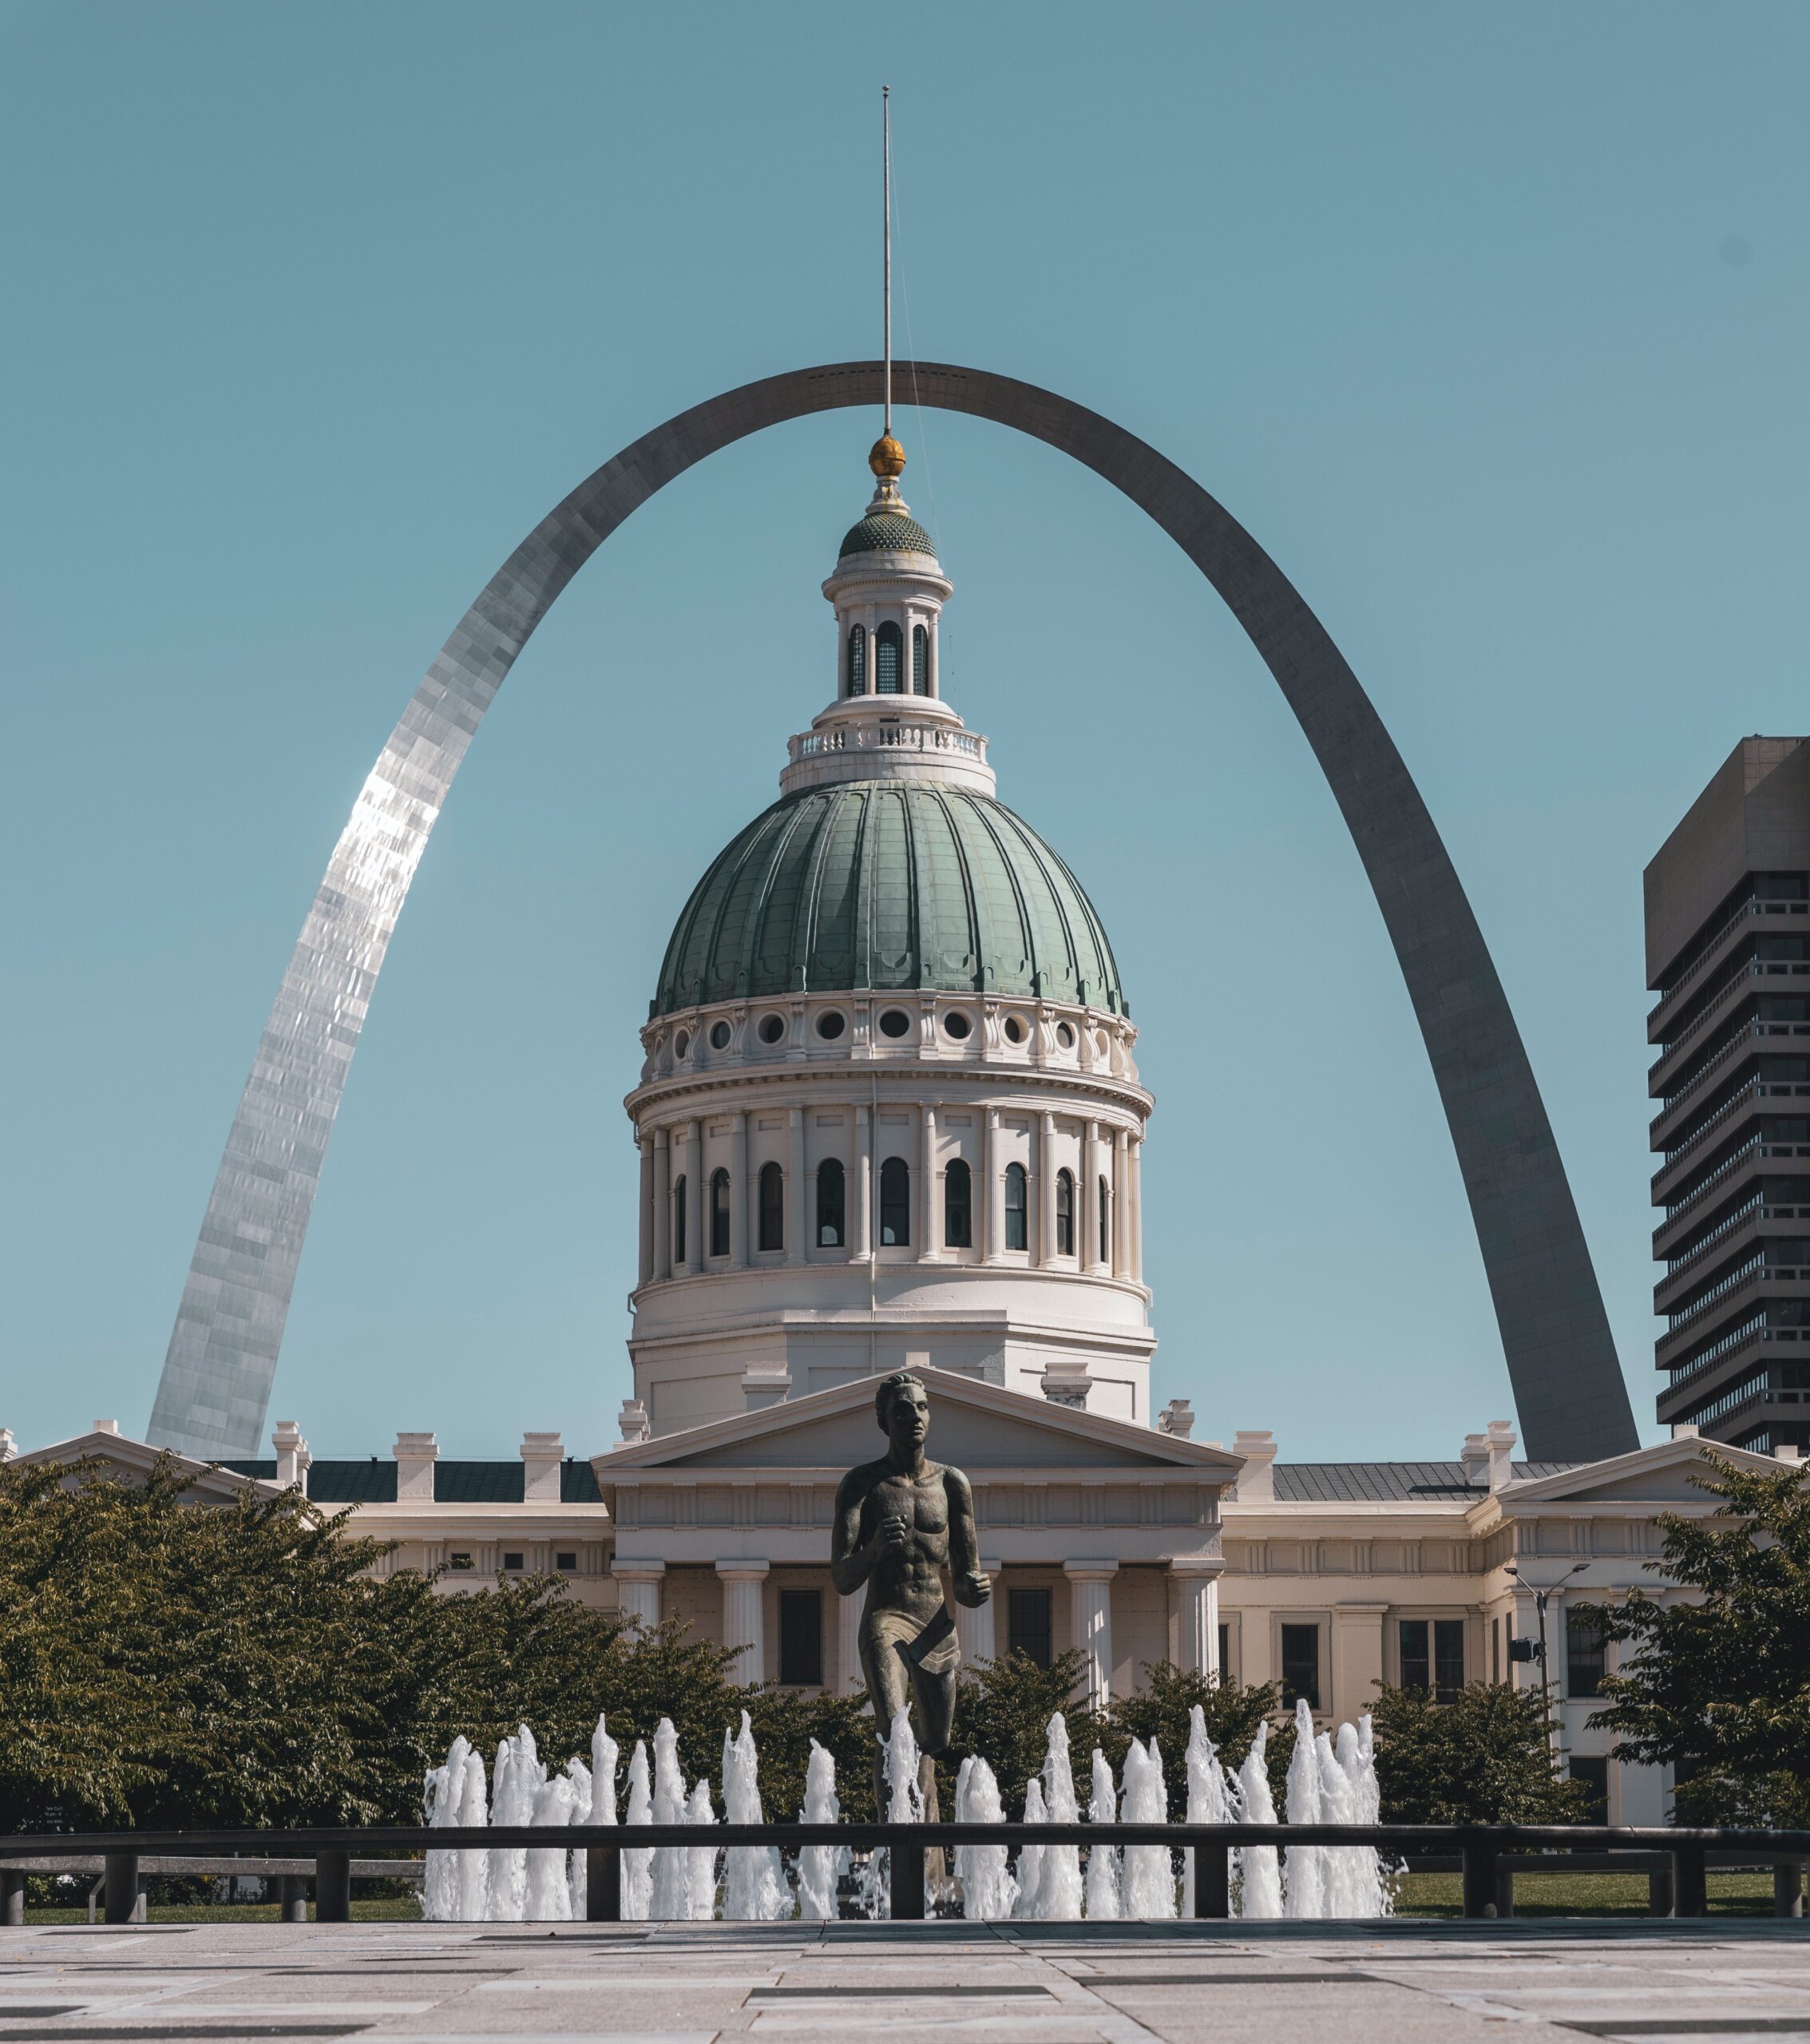 View of St. Louis City Old Courthouse with the Arch in the background